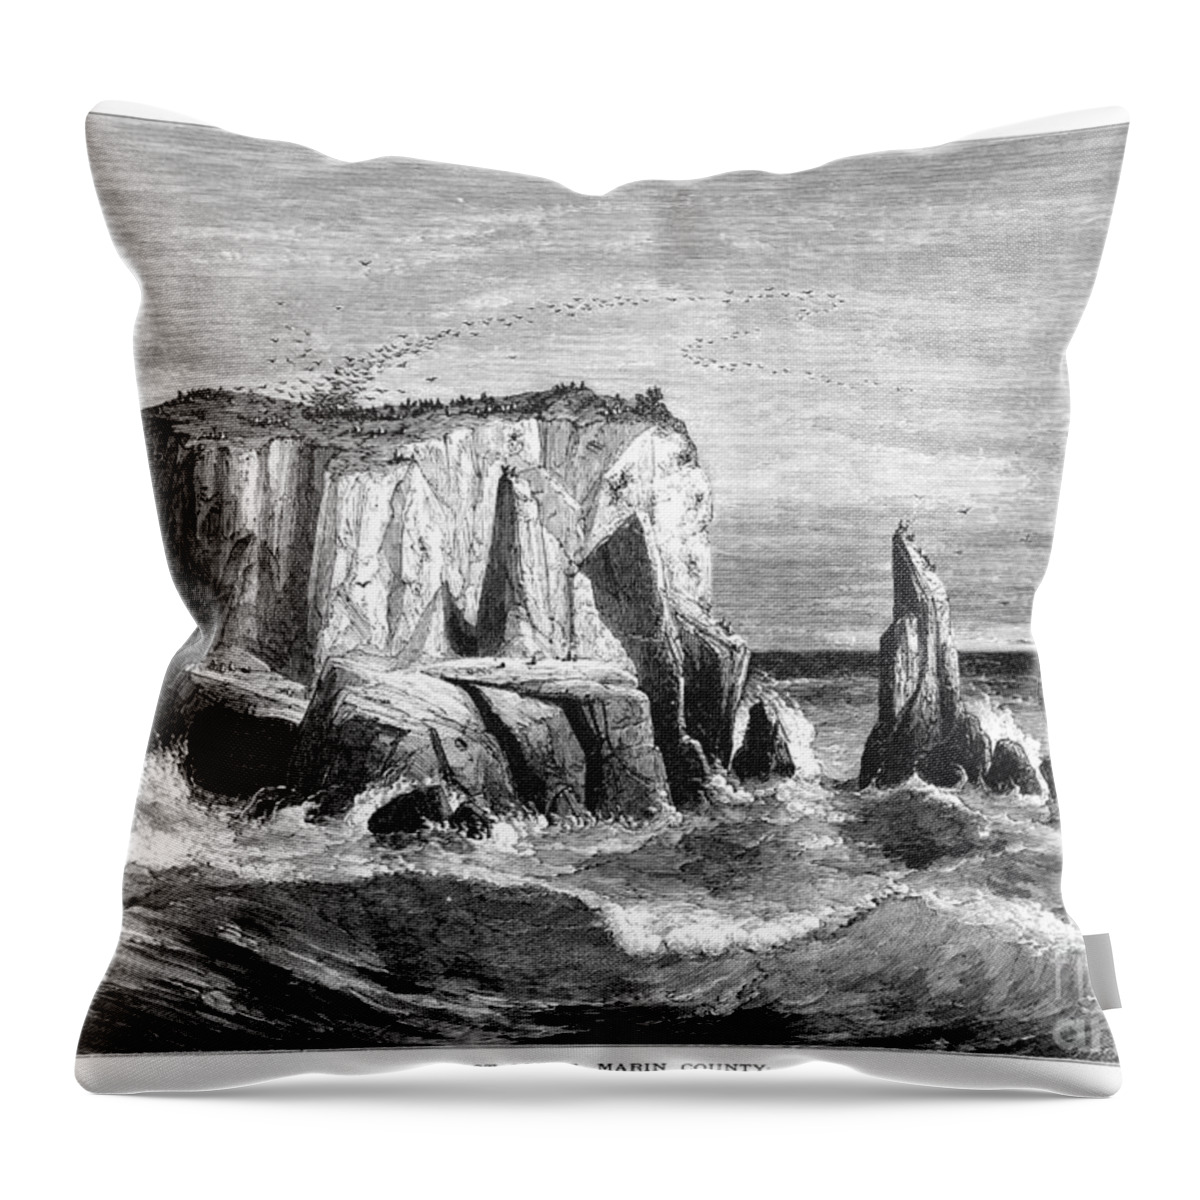 1872 Throw Pillow featuring the drawing California Coast by Robert Swain Gifford